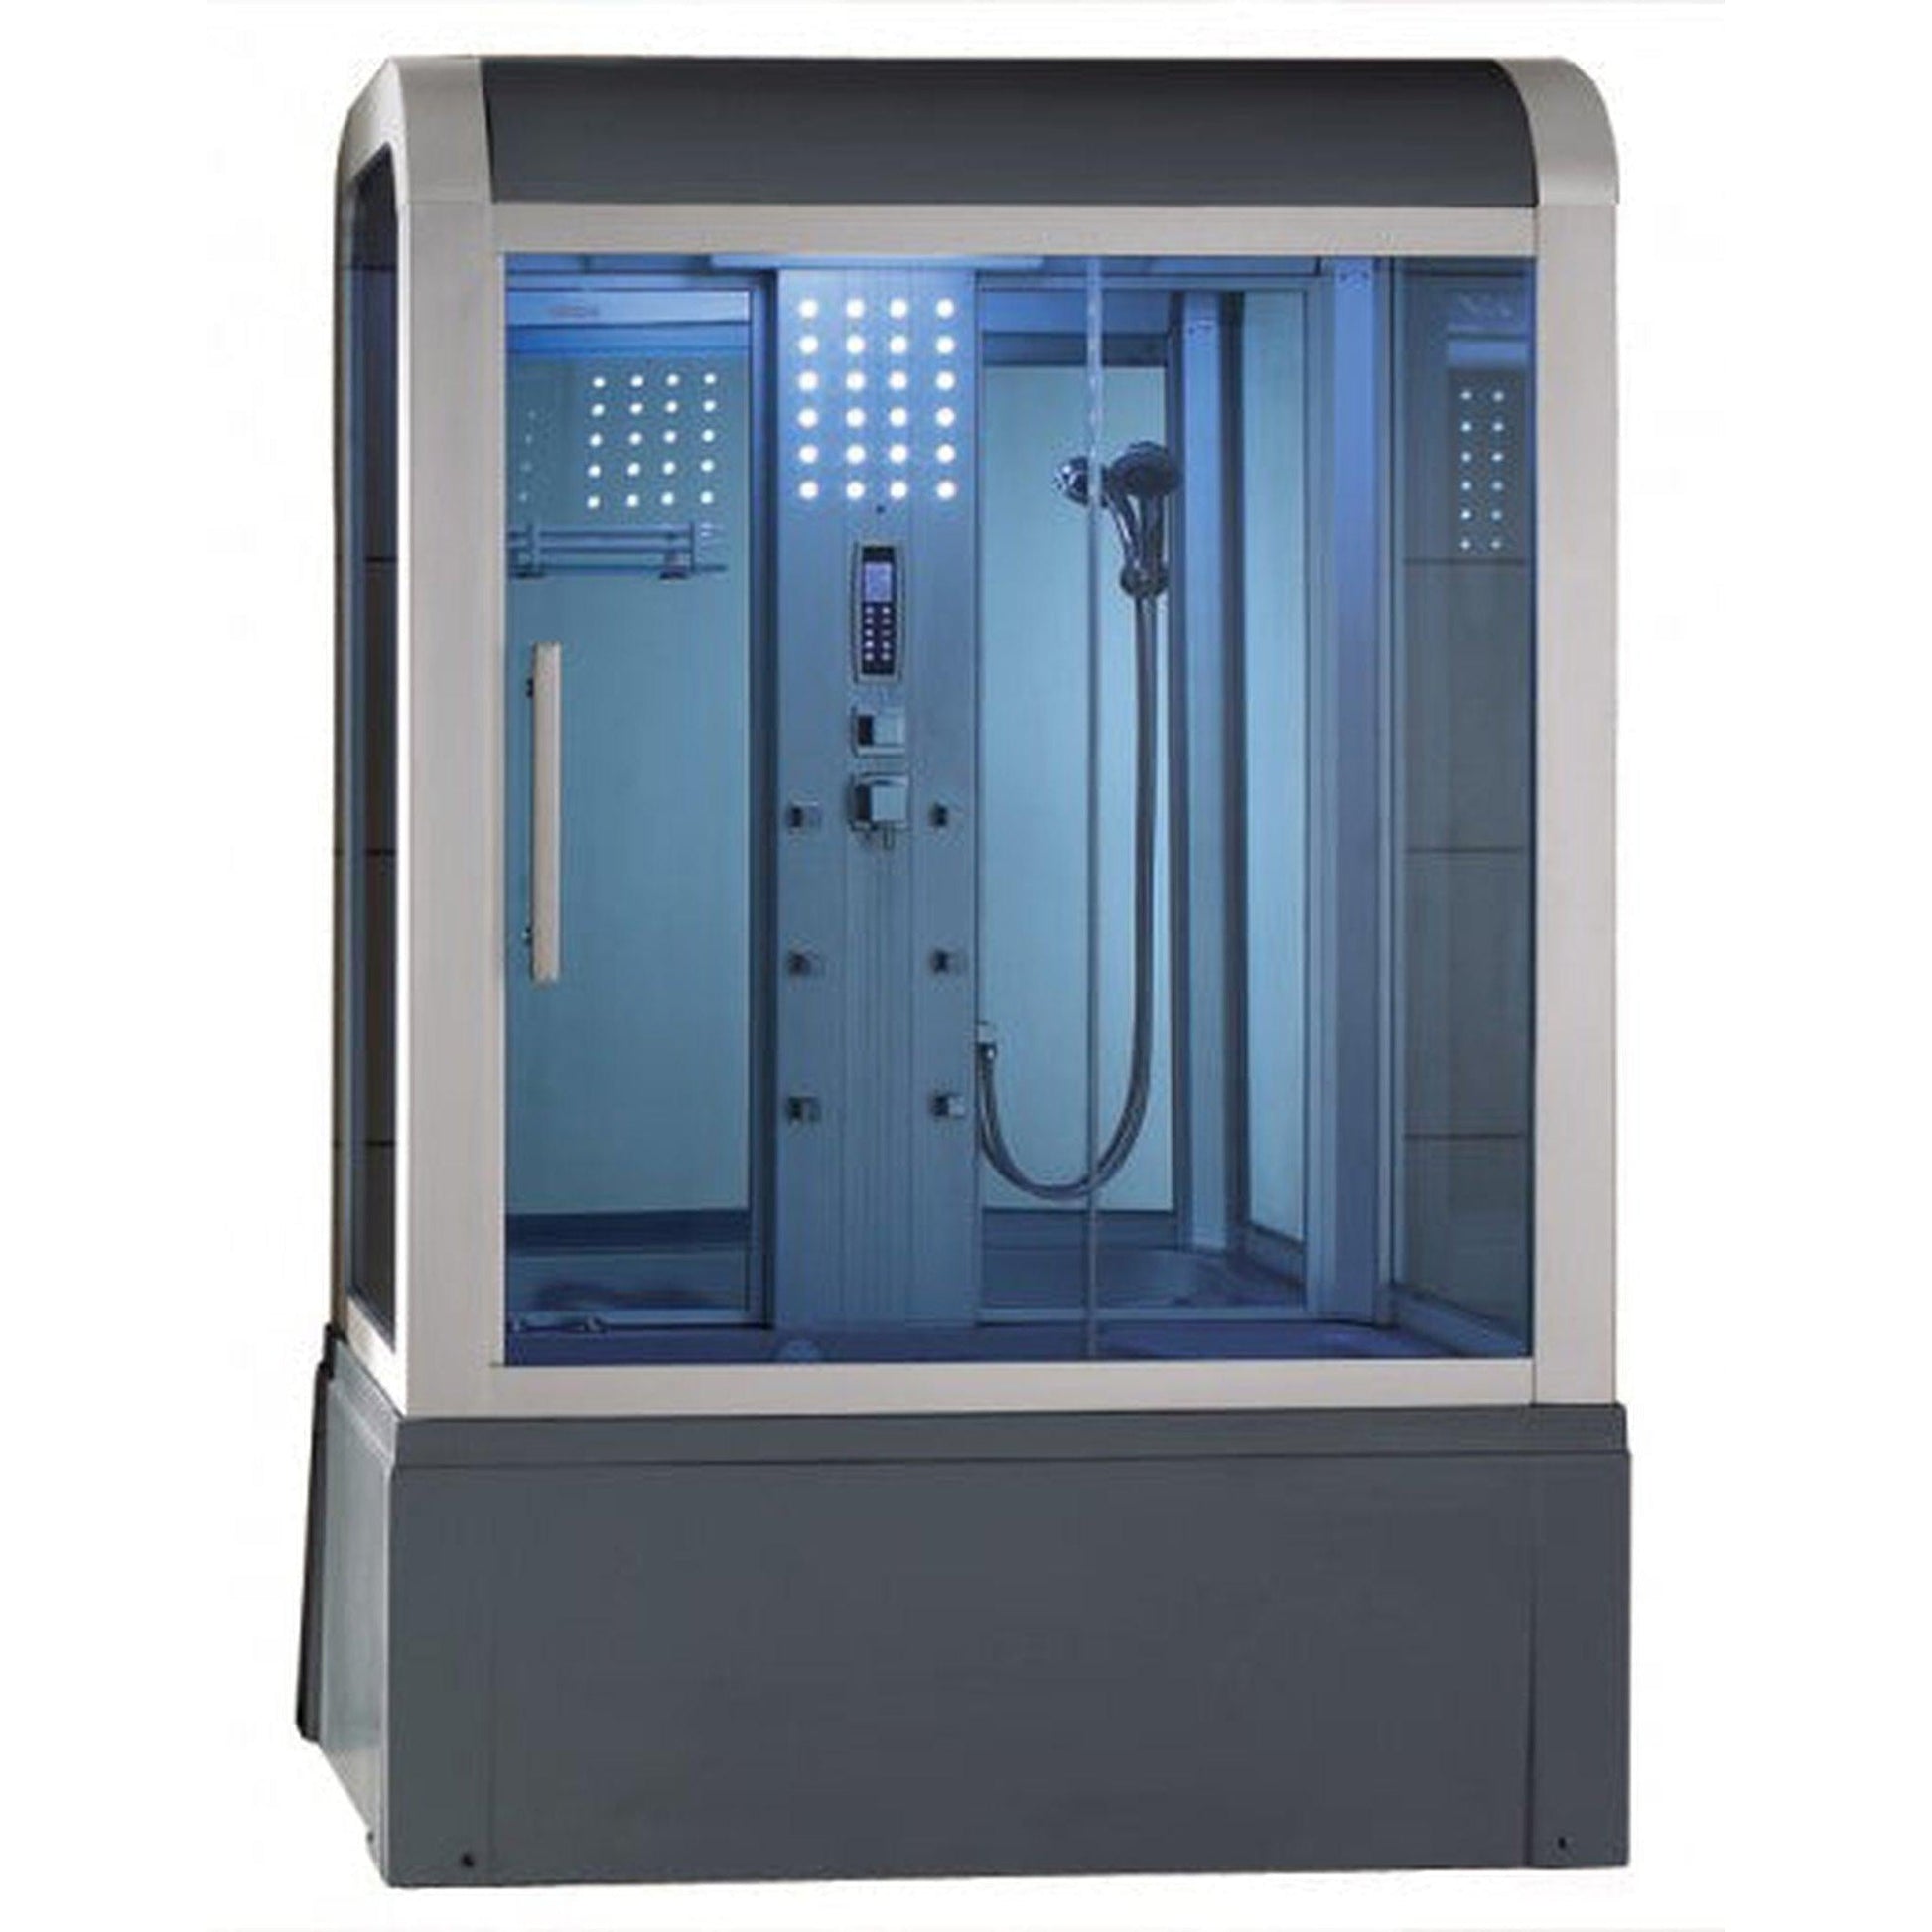 Mesa Yukon 60" x 33" x 87" Blue Tempered Glass Gray Exterior Freestanding Steam Shower Jetted Tub Combo With 3kW High Output Steam, 6 Acupuncture Body Jets and 6 Whirlpool Jets